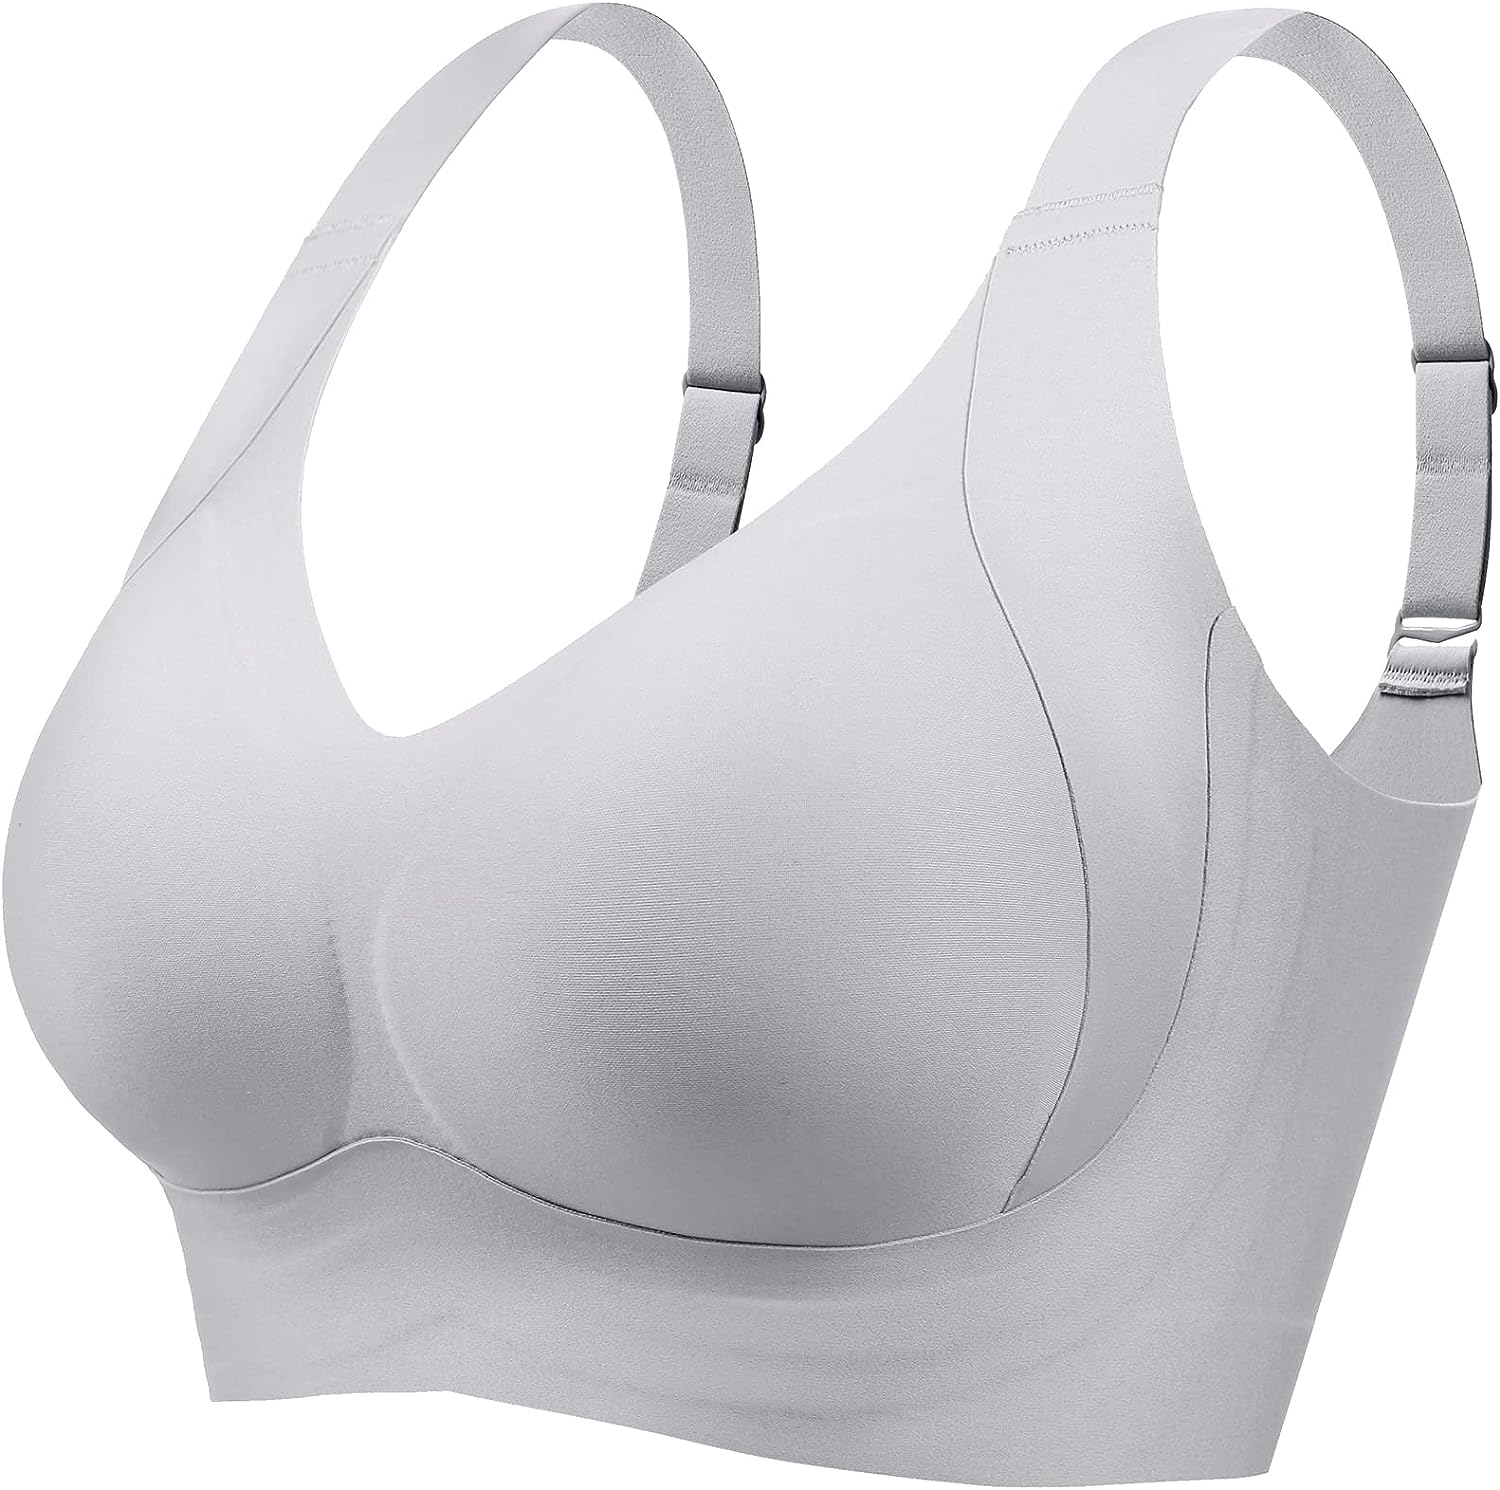 Boond Bra, Daily Comfort Wireless Shaper Bra for Posture Correction and Sweet  Curves, Adjustable and Breathable Sports Bras for Women (S, Beige) at   Women's Clothing store